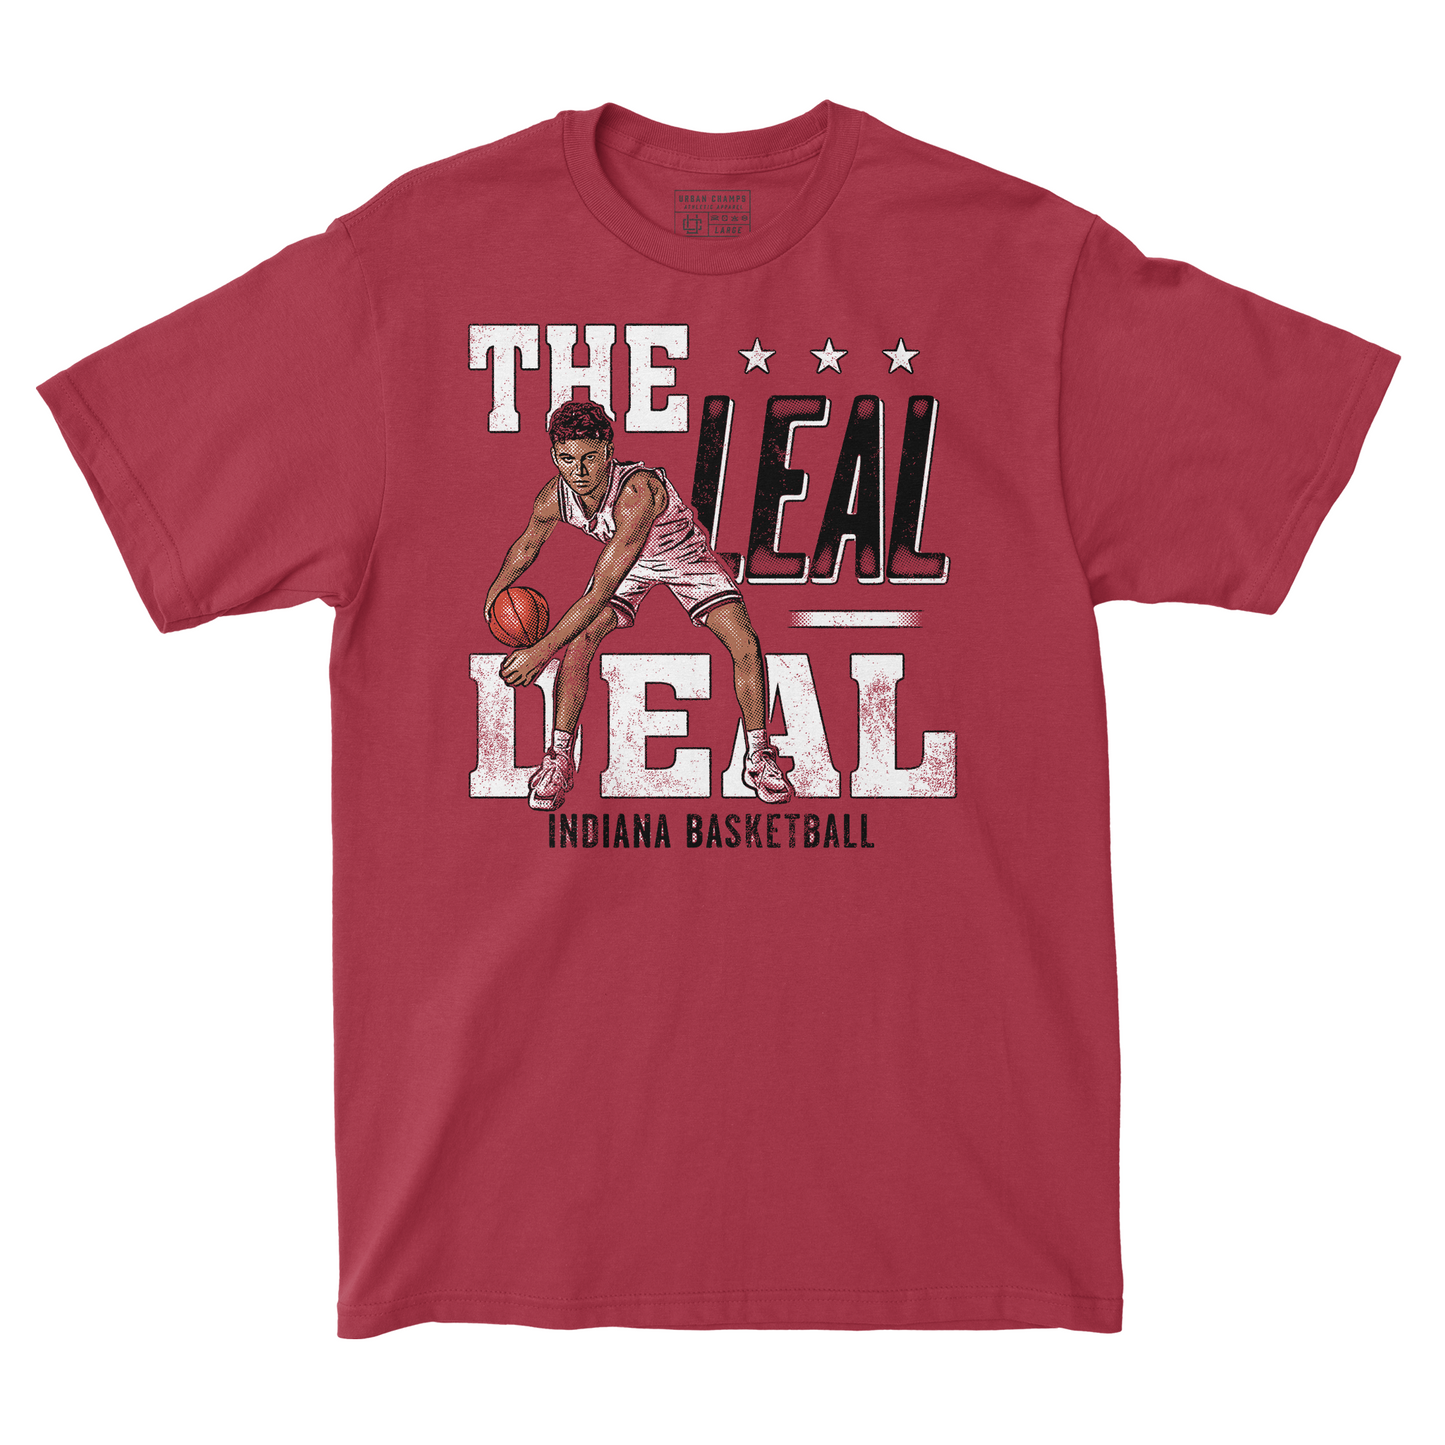 EXCLUSIVE RELEASE: Anthony 'The Leal Deal' Tee